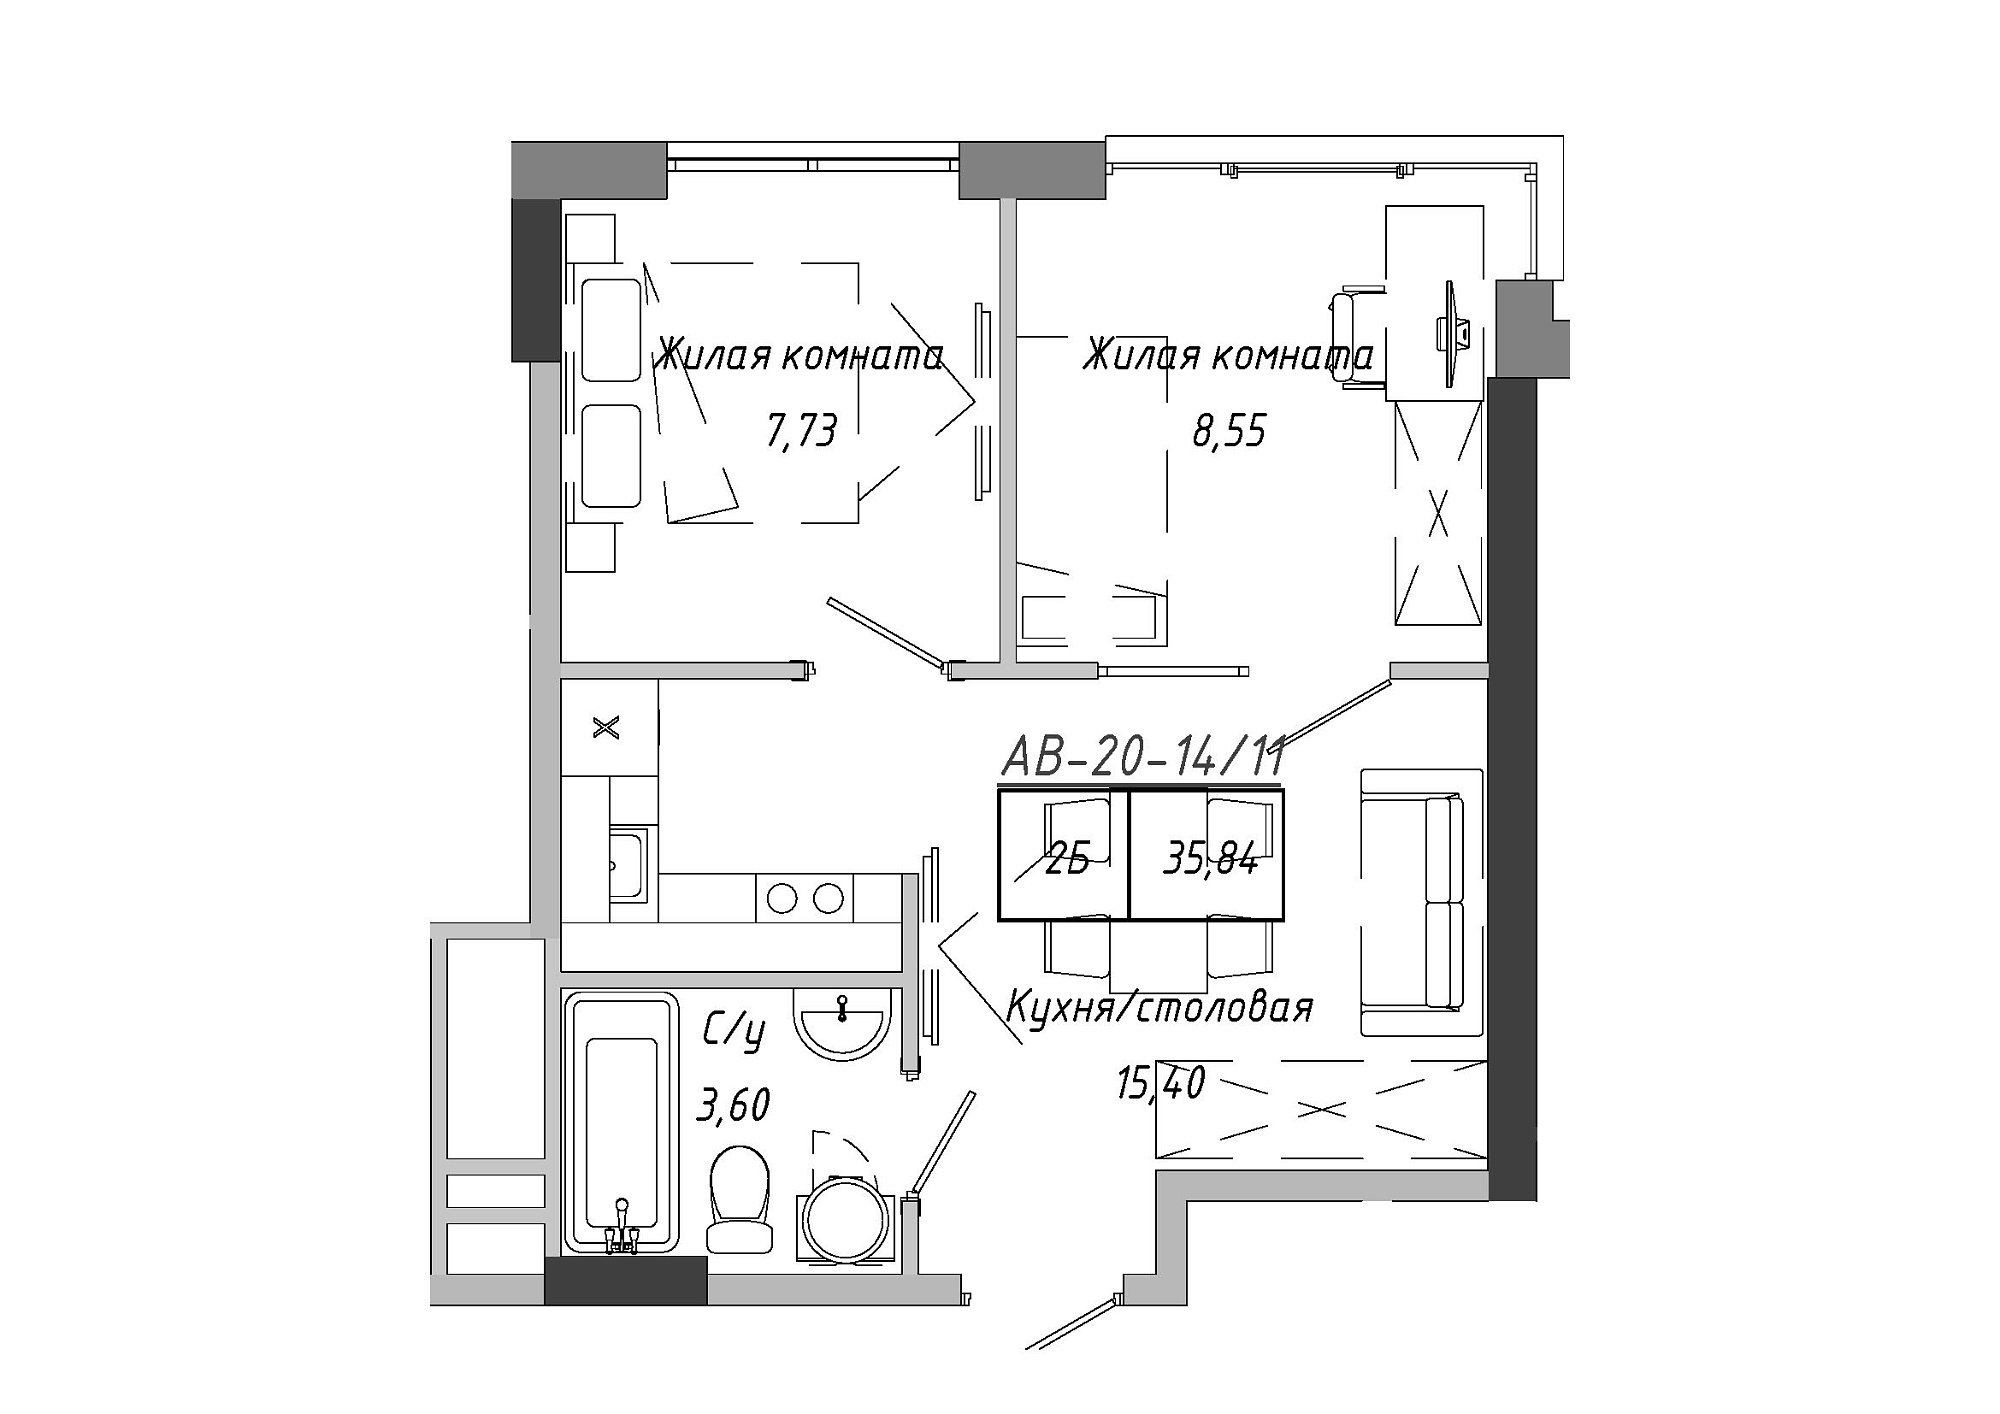 Planning 2-rm flats area 35.84m2, AB-20-14/00111.